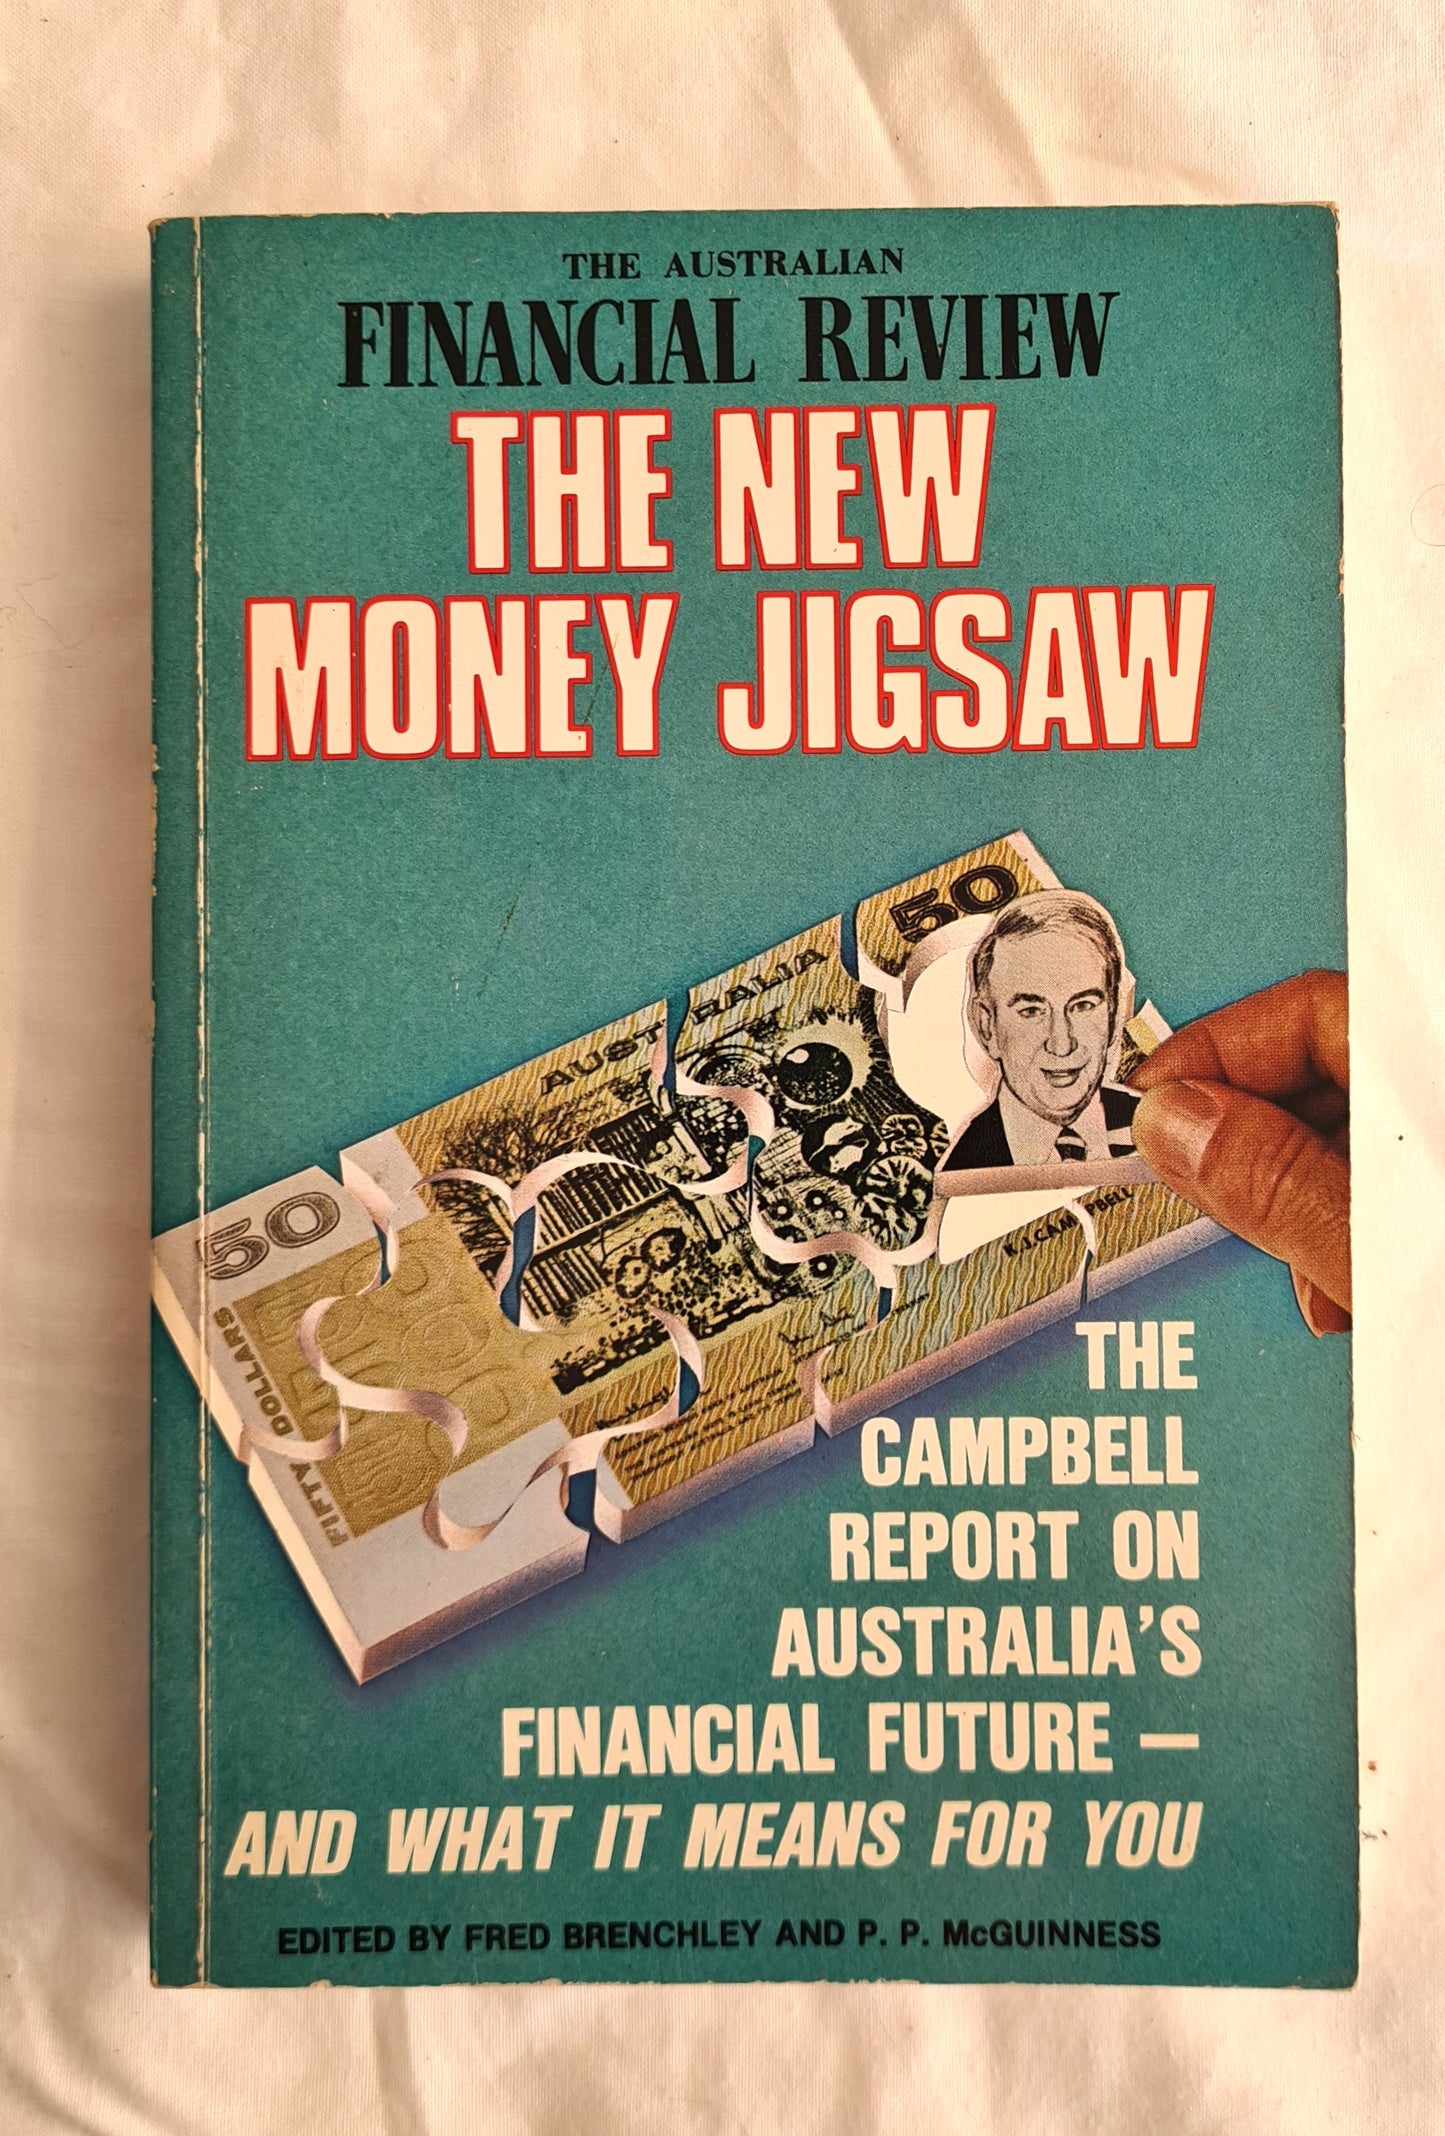 The New Money Jigsaw  Edited by Fred Brenchley and P. P. McGuinness